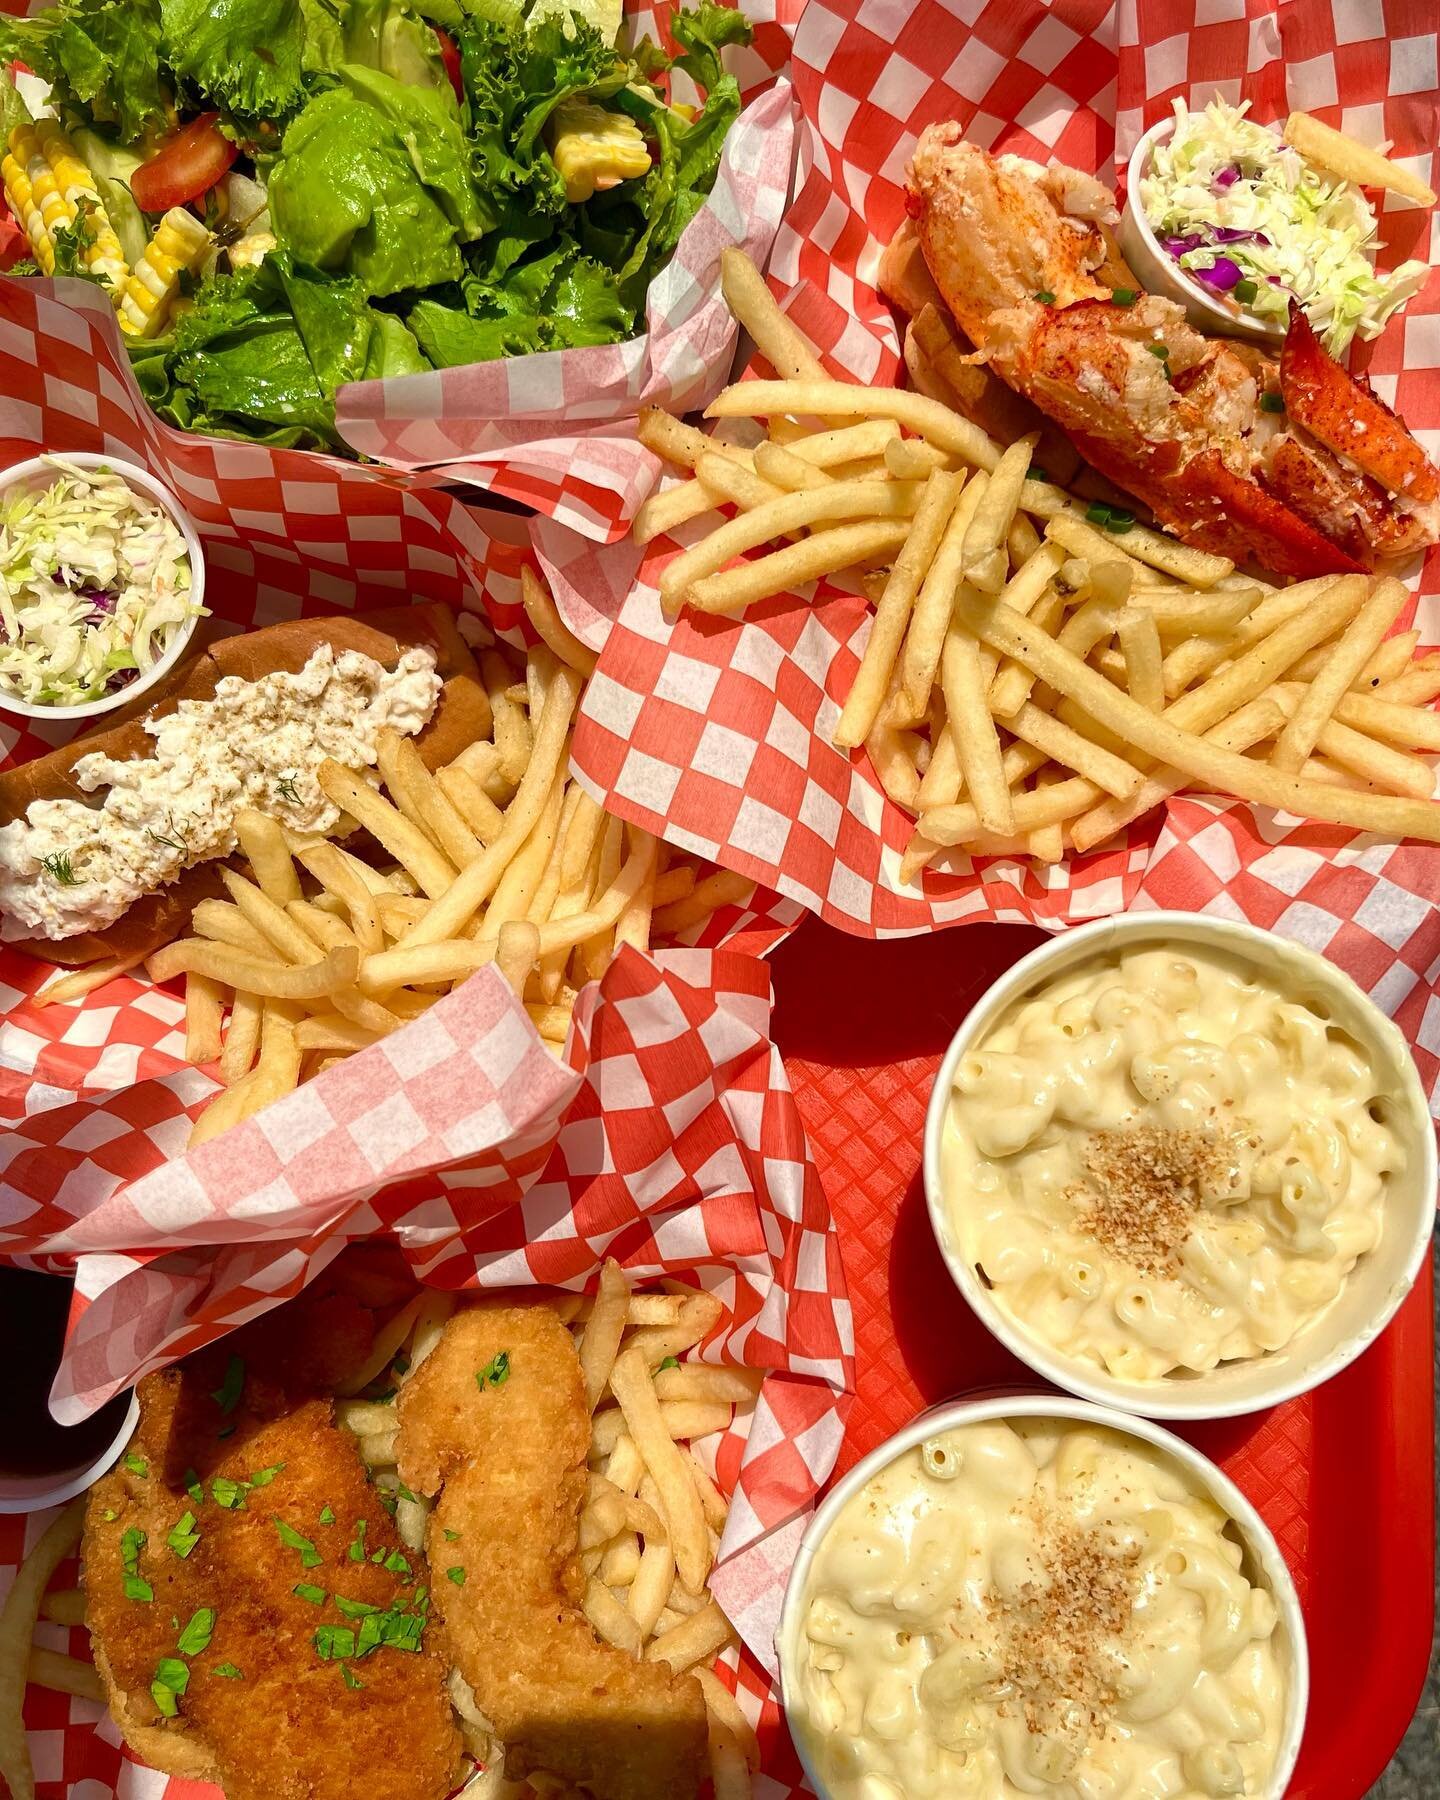 @tannersboathouse &mdash; a New England seafood shack in #tannersville &mdash; serves up lobster rolls, lake views, rentable canoes, beer, wine, and booze, AND it has a giant playground next door&hellip;⁣
⁣
Could this be the best new family-friendly 